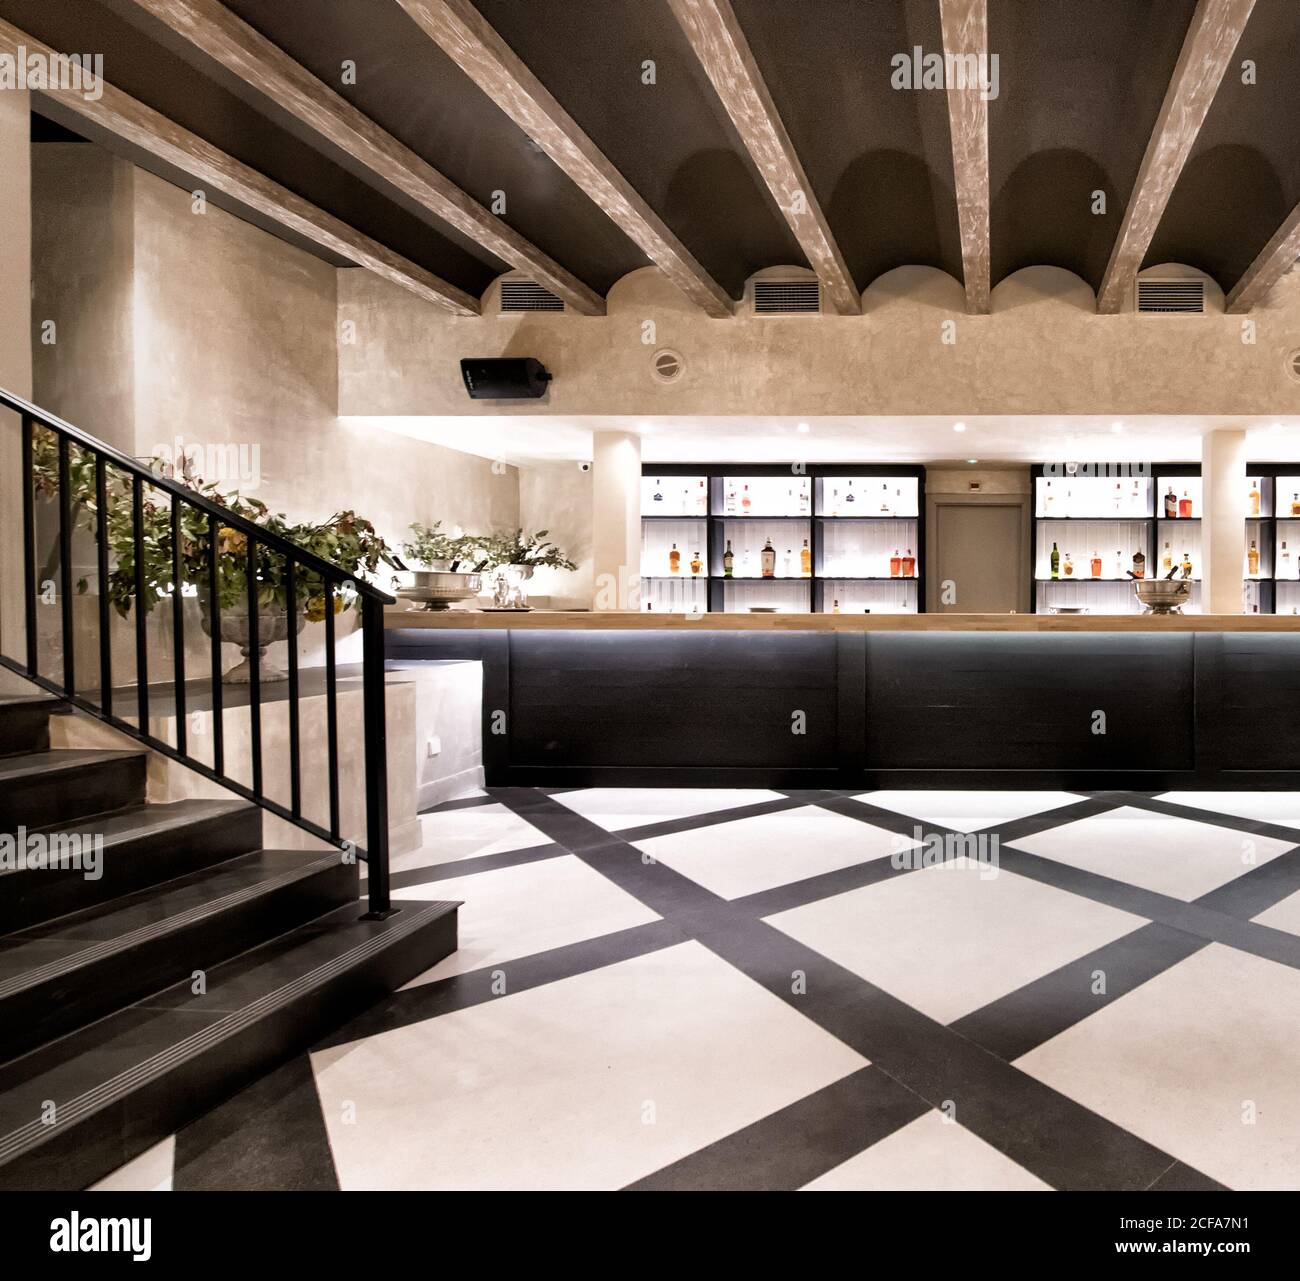 Interior of hallway with bar of contemporary building with geometric design in black and gray colors with loft elements Stock Photo